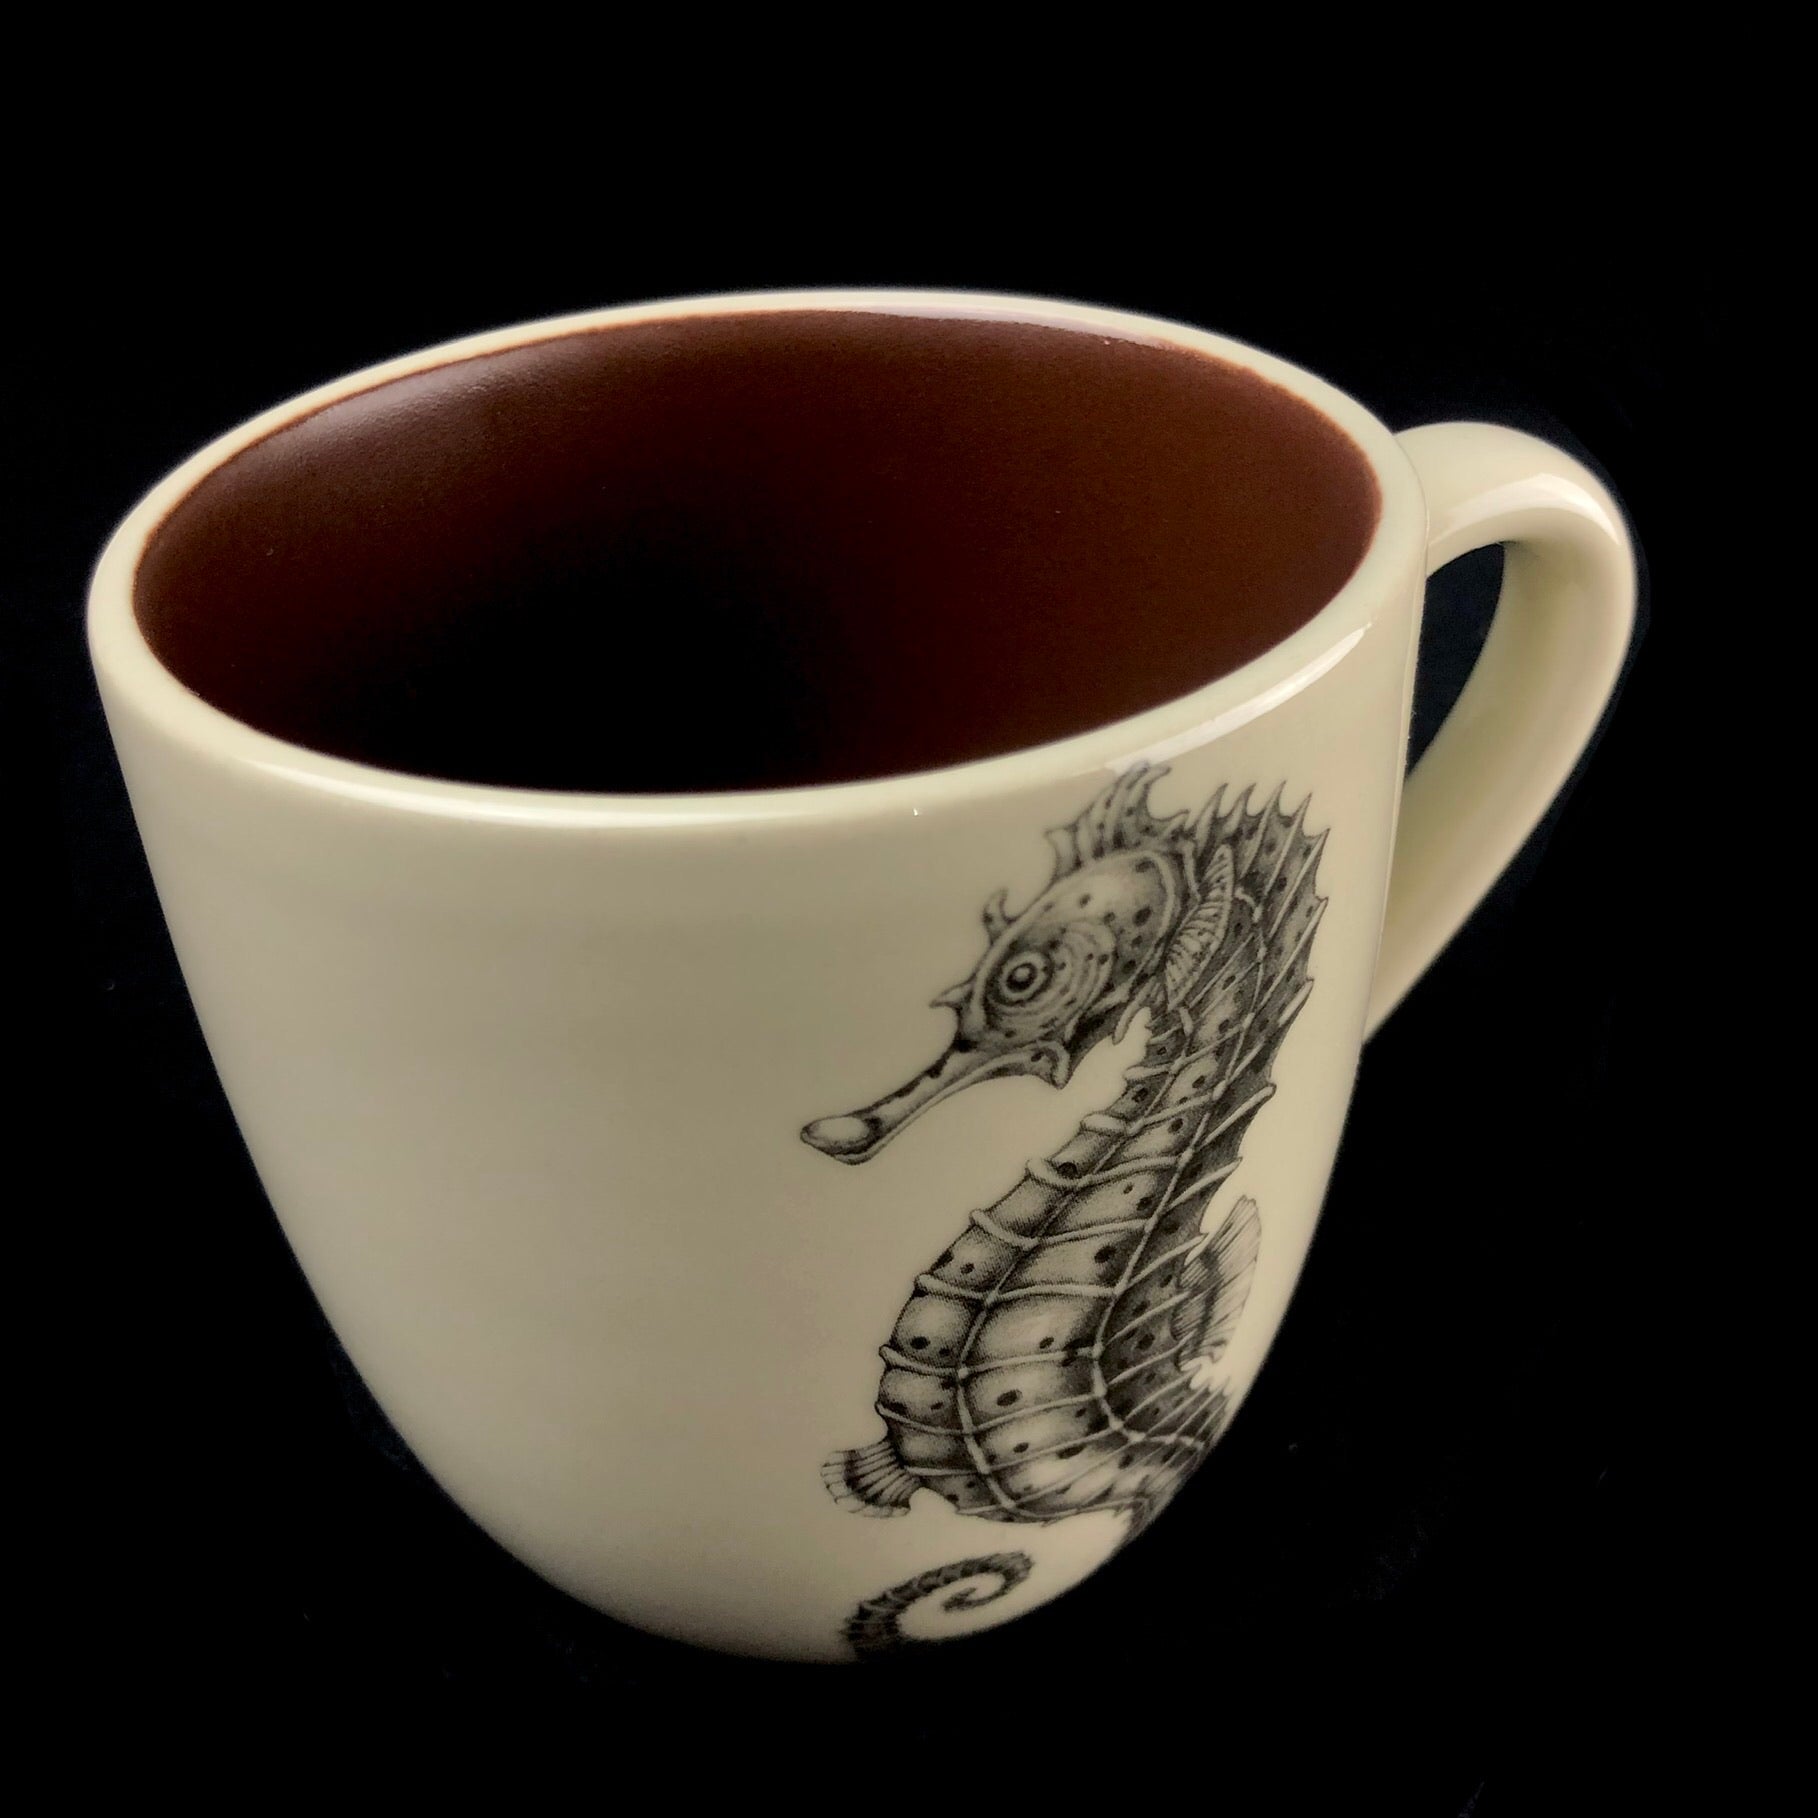 Top view of Seahorse Mug with brown interior